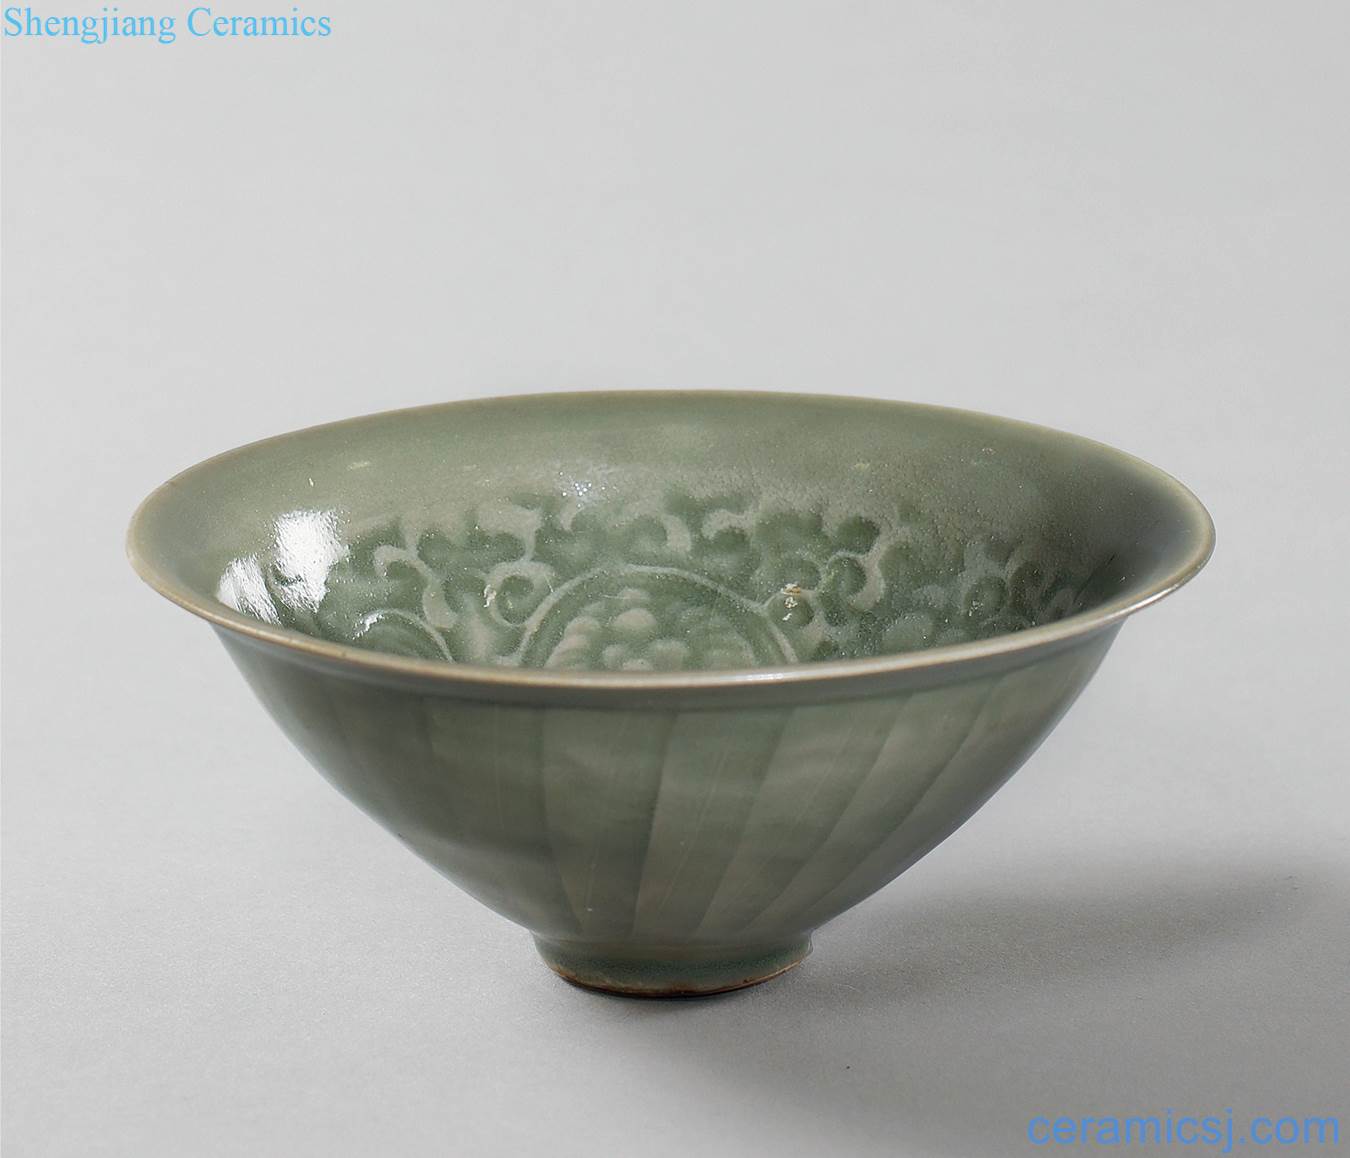 The song dynasty Yao state kiln printed flower flower lamp